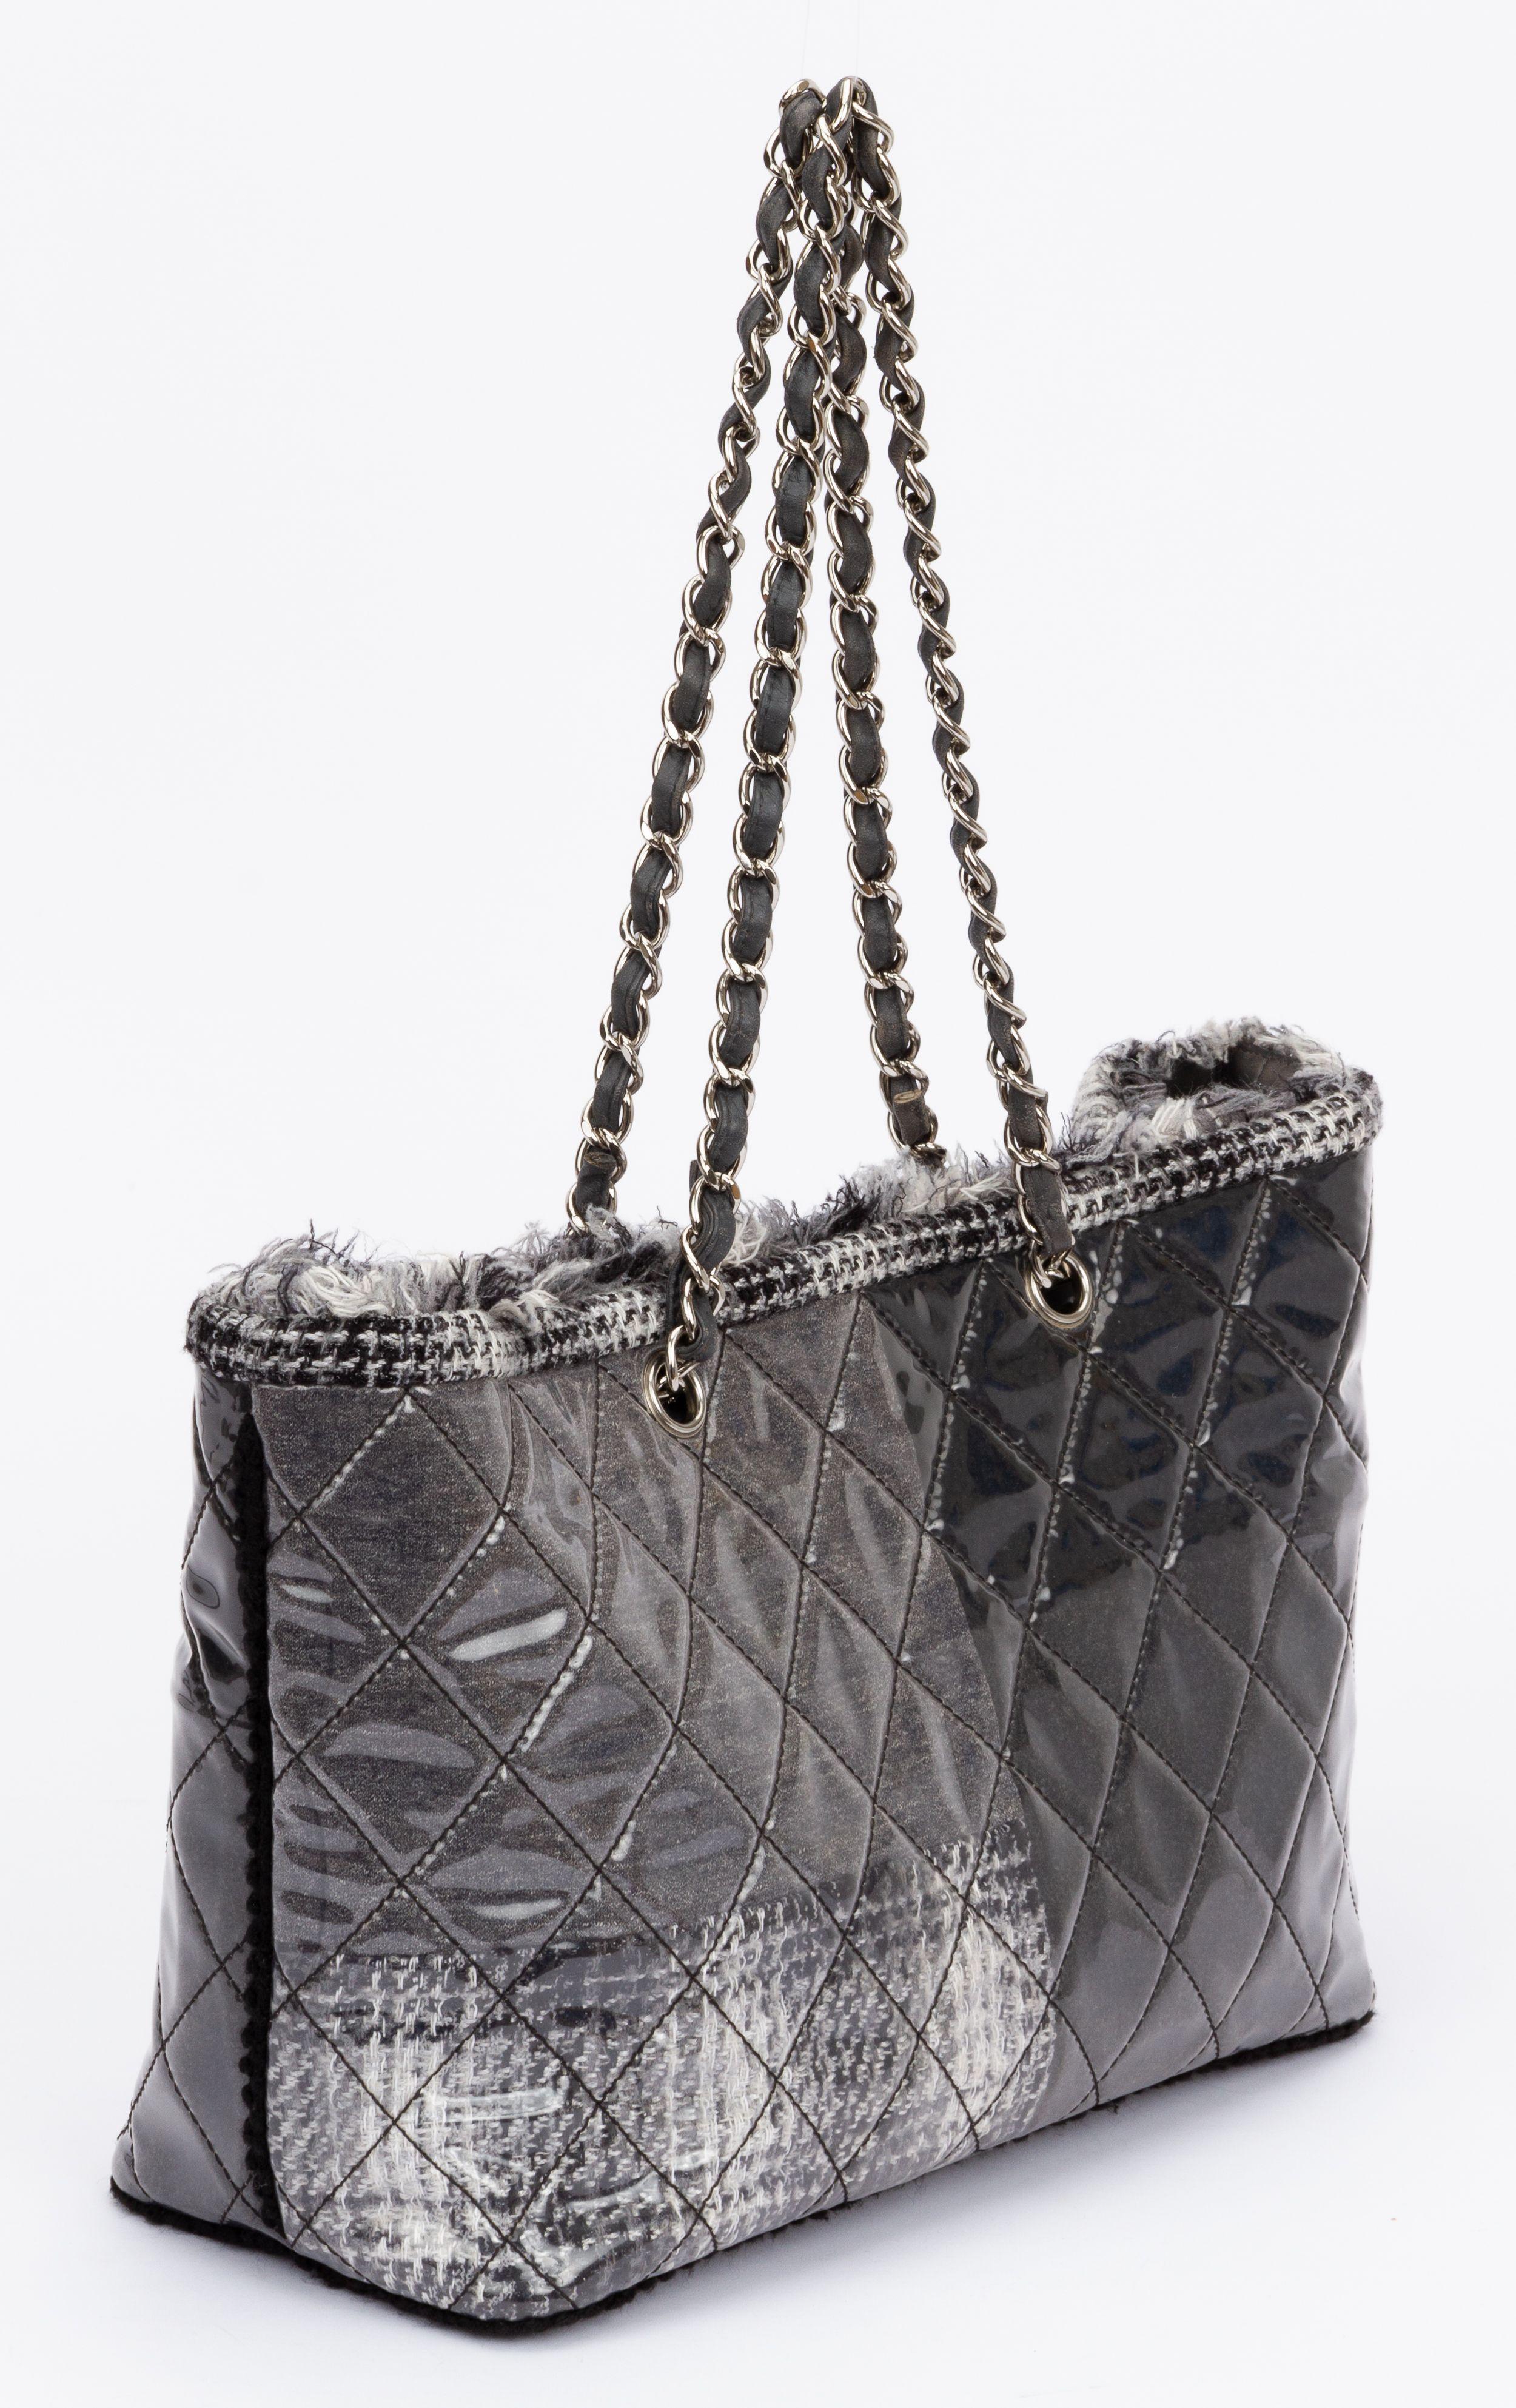 Chanel Funny Tweed Tote - 2 For Sale on 1stDibs